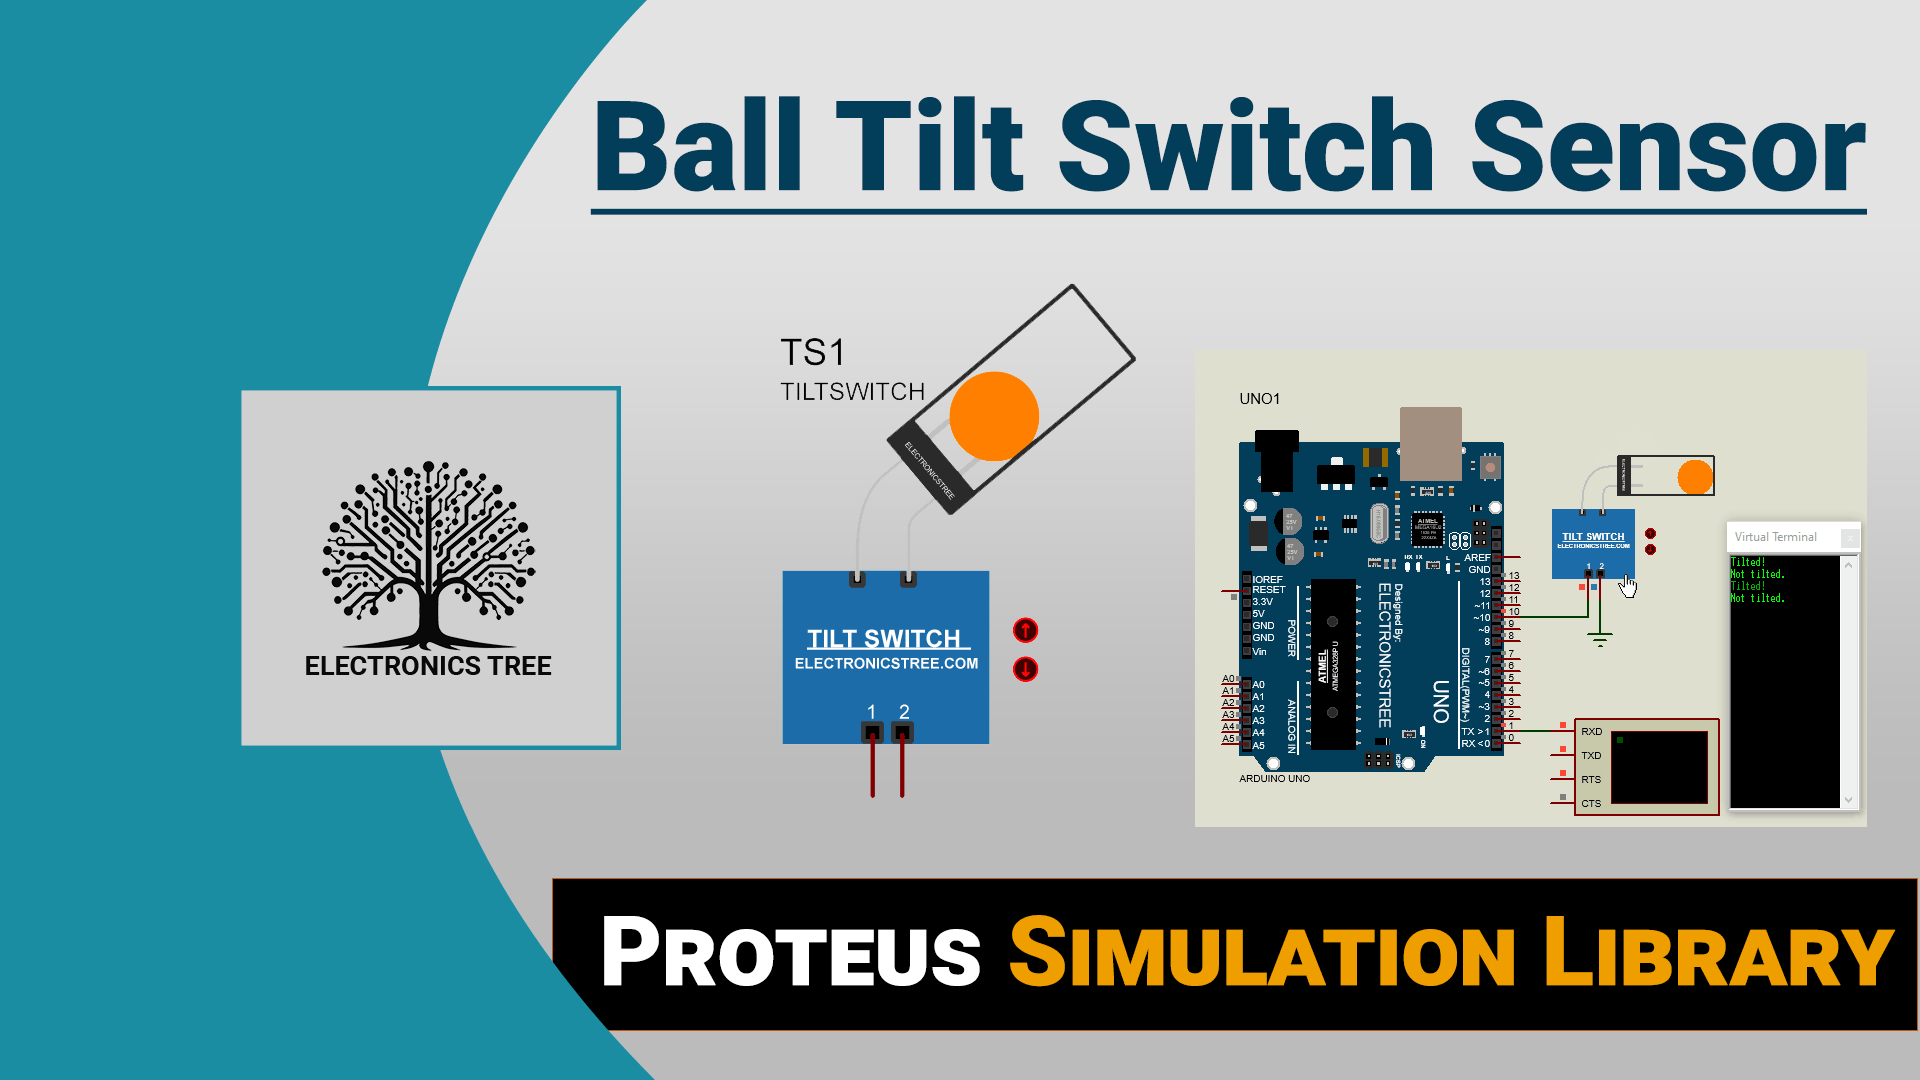 You are currently viewing Ball Tilt Switch Sensor Model for Proteus 8 | Simplistic Design for Simulation